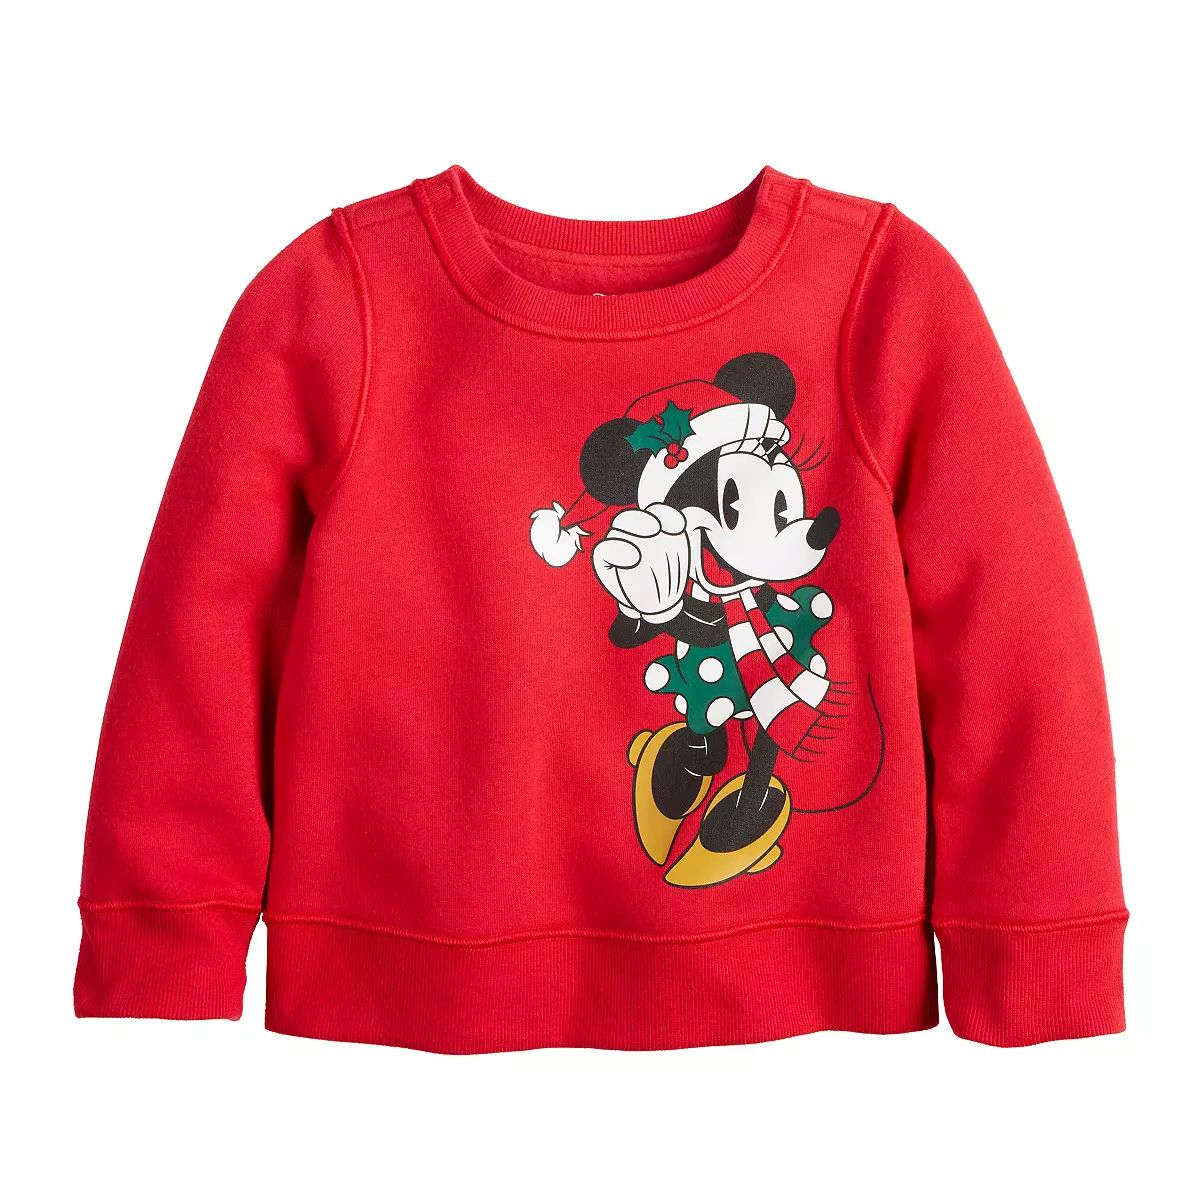 Disney's Minnie Mouse Girls 4-12 Adaptive Fleece Pullover Sweater by Jumping Beans® | Kohl's